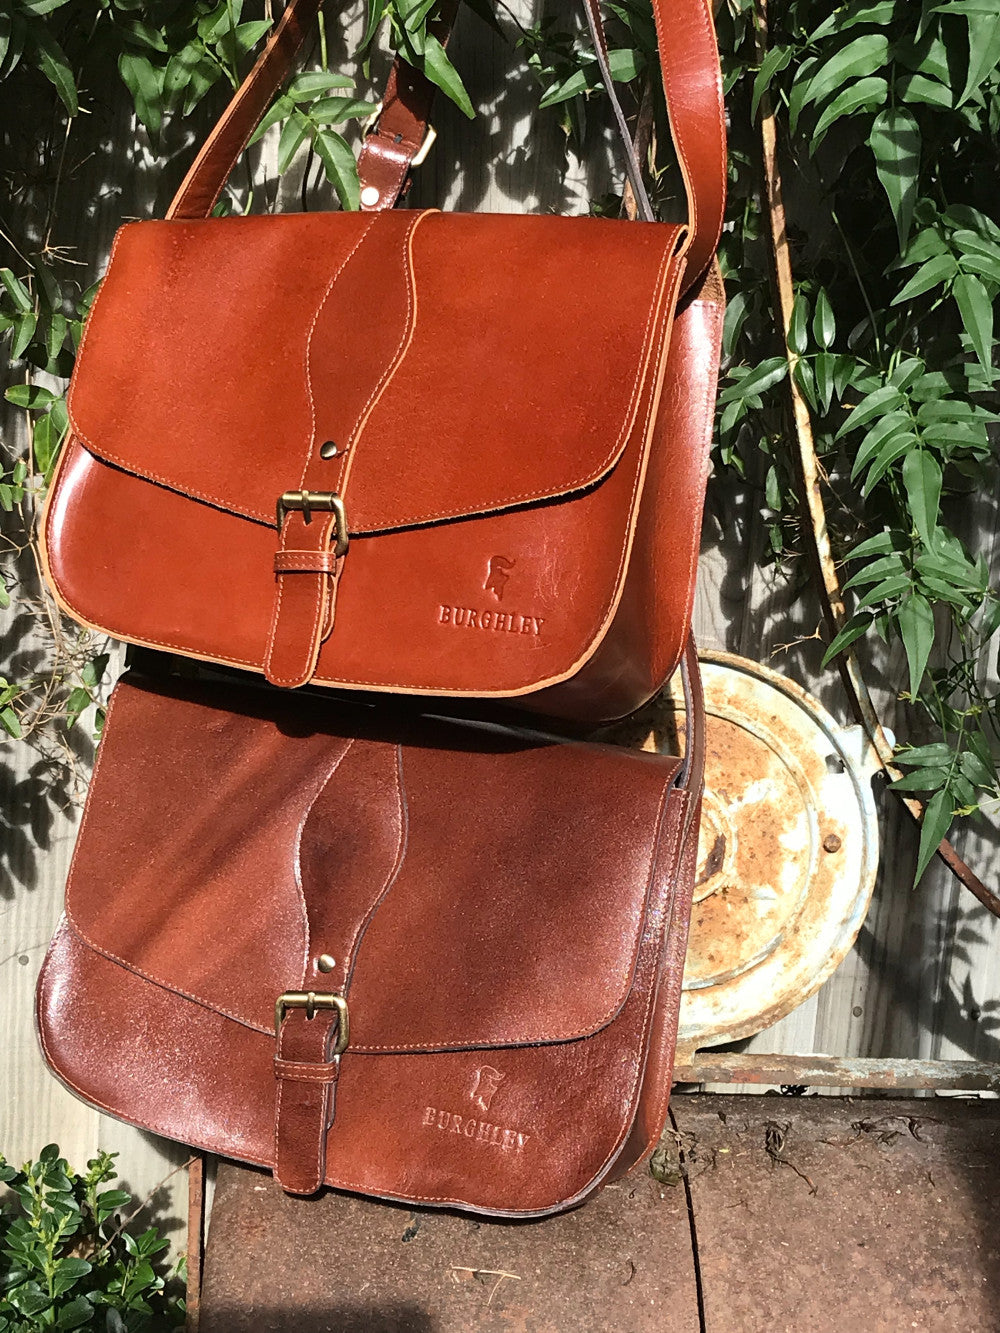 The Fairford by Burghley Bags is a leather handbag in the saddlebag design. It can be worn as a shoulder bag or cross body bag and is available in light brown and dark brown.